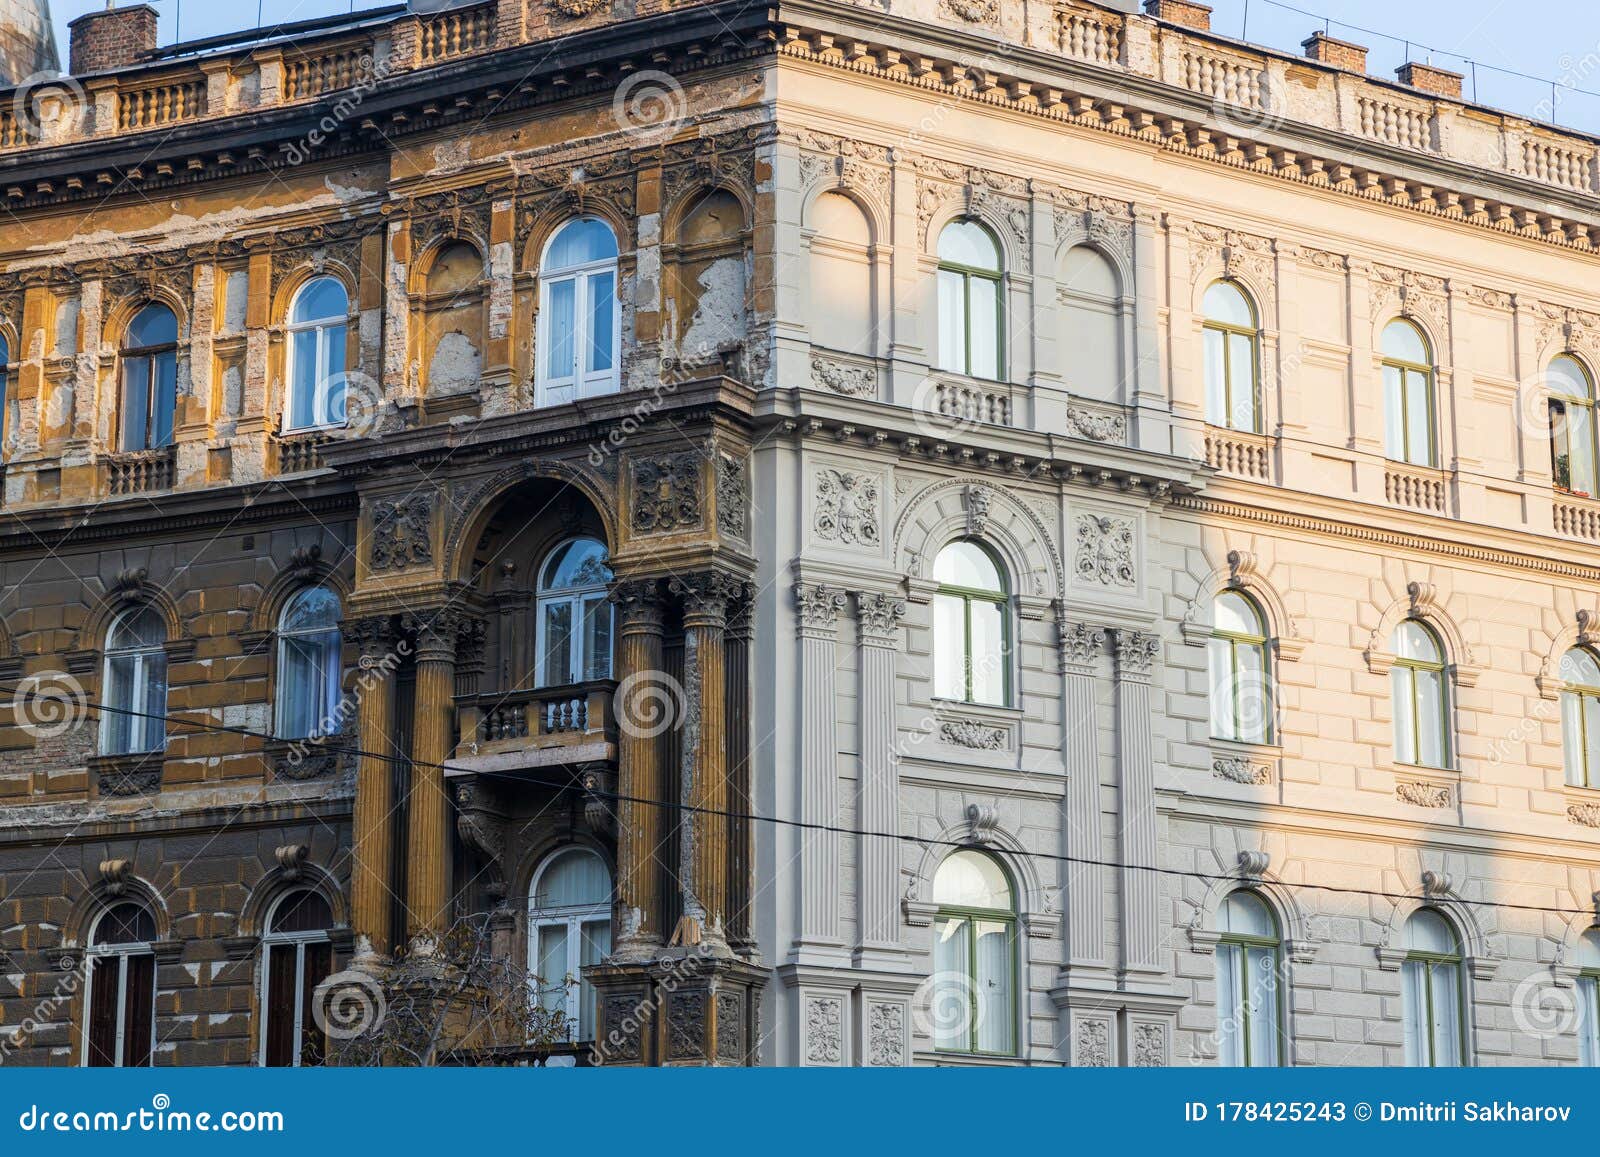 contrast on the building in budapest - one part of the house is renewed